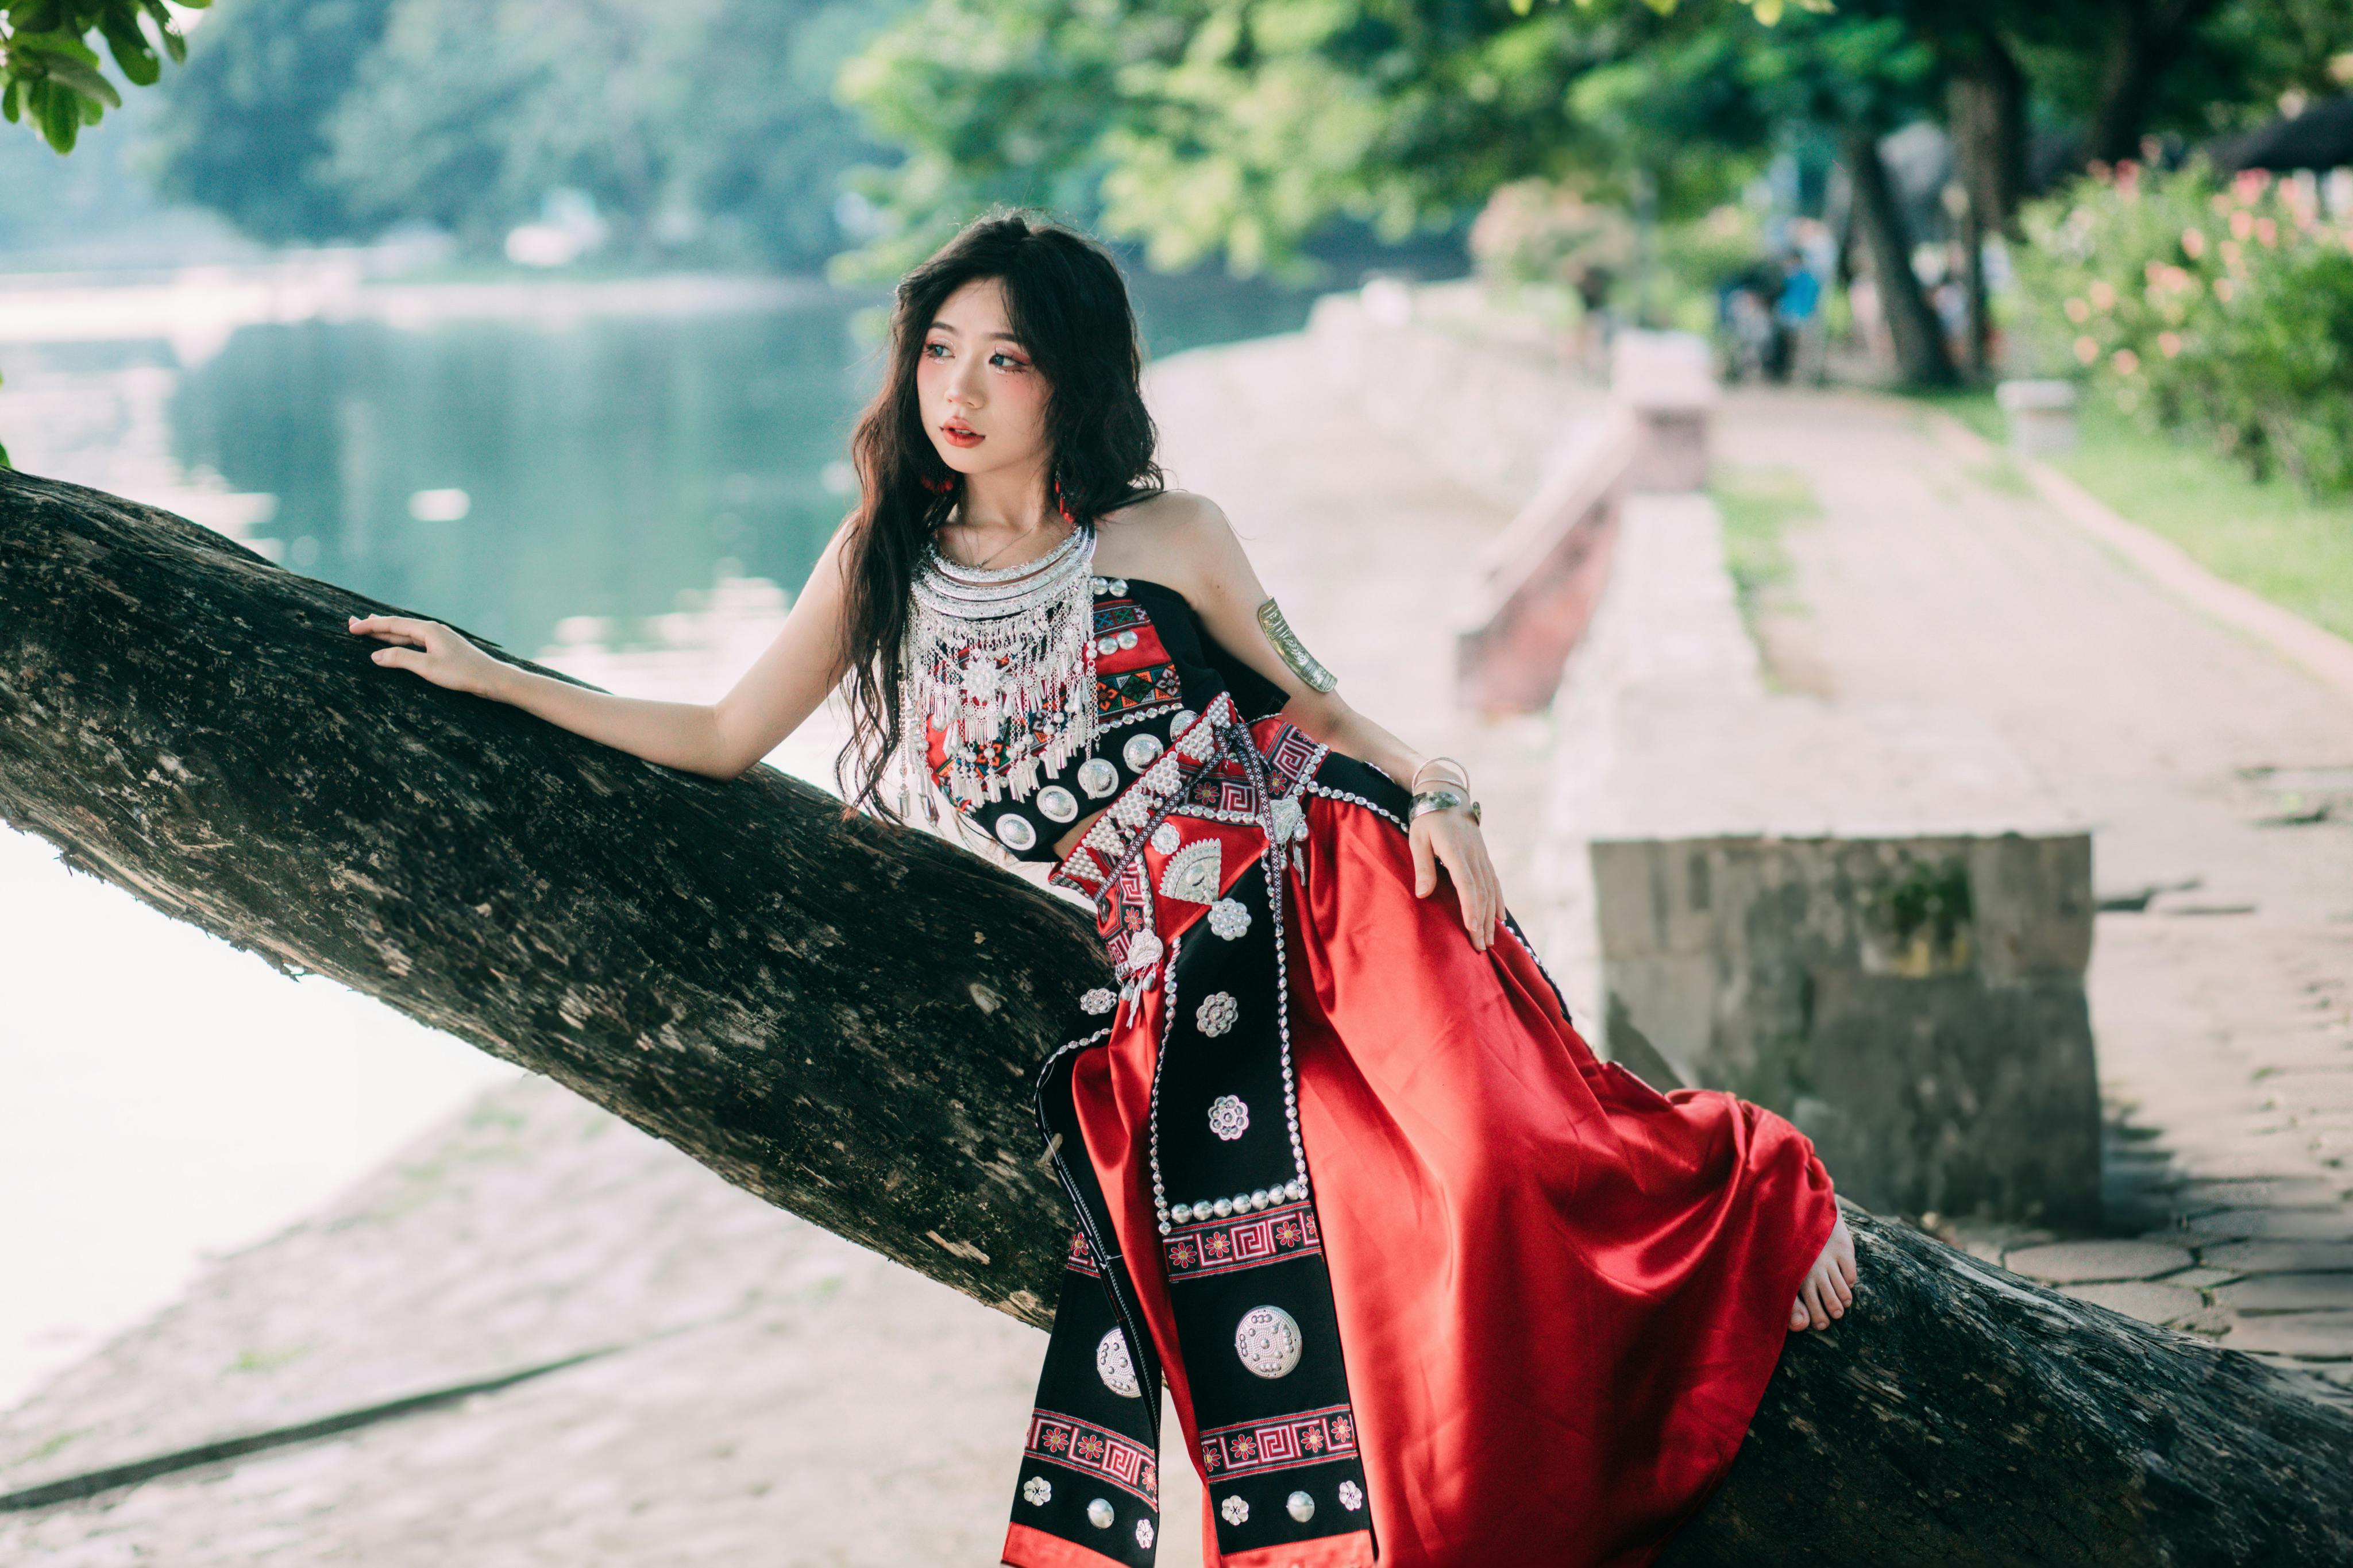 Young Woman in Traditional Dress Posing near Tree Trunk · Free Stock Photo